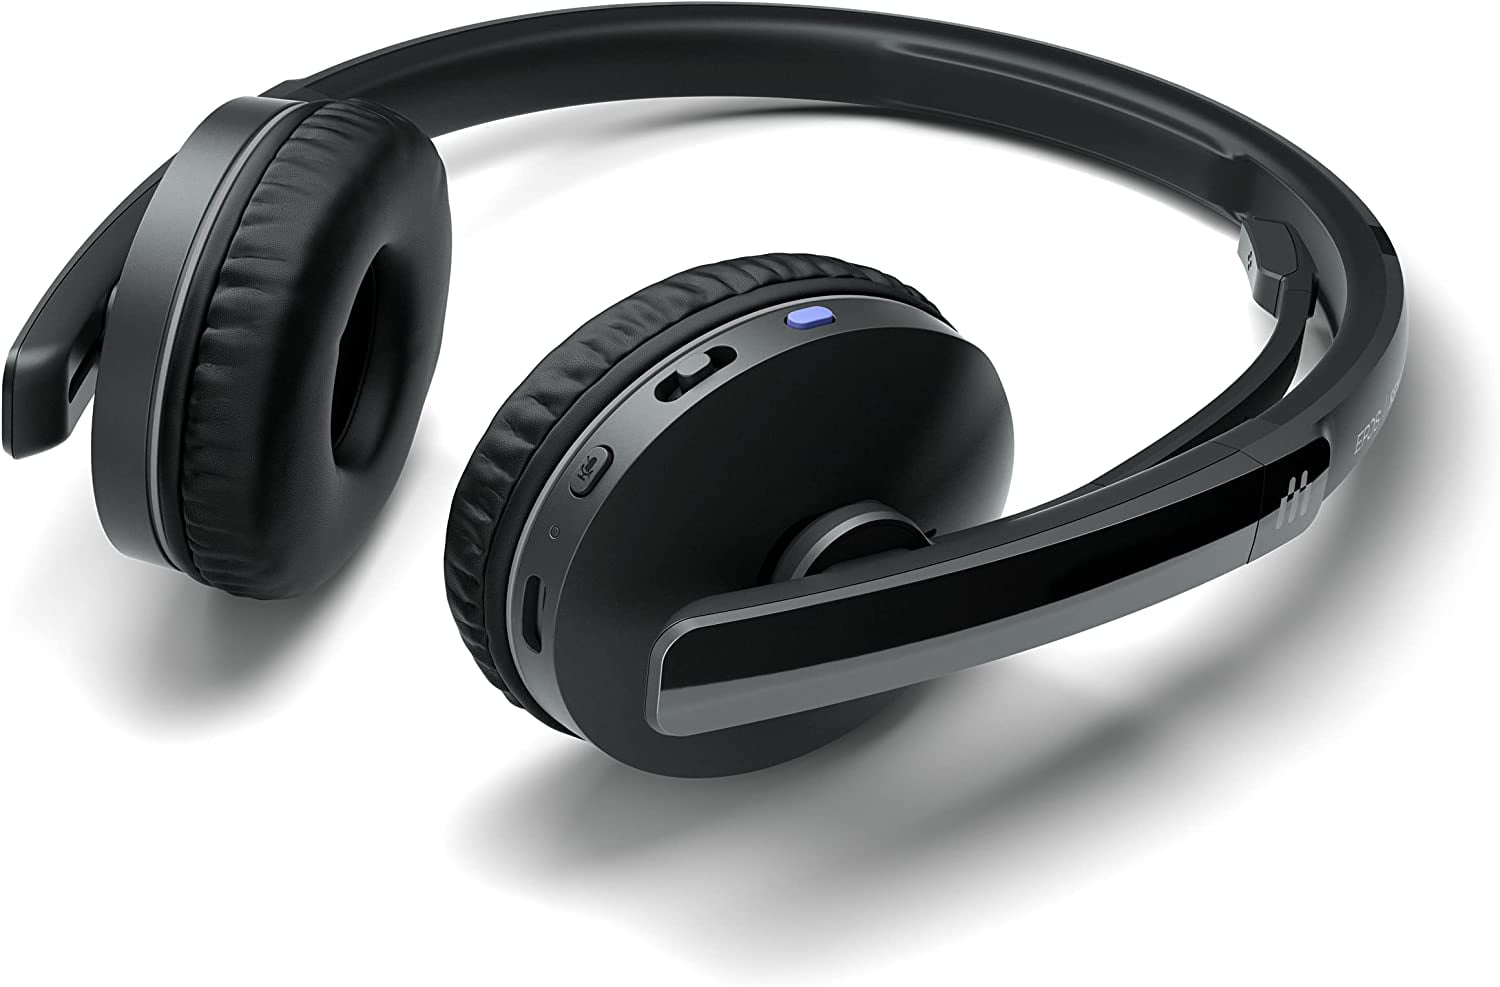 Coöperatie tuin gras Sennheiser Adapt 260 (1000882) Dual Sided Headset, Wireless,  Dual-Connectivity Bluetooth, USB-A Dongle Included, UC Optimized and  Microsoft Teams Certified, Black - Walmart.com